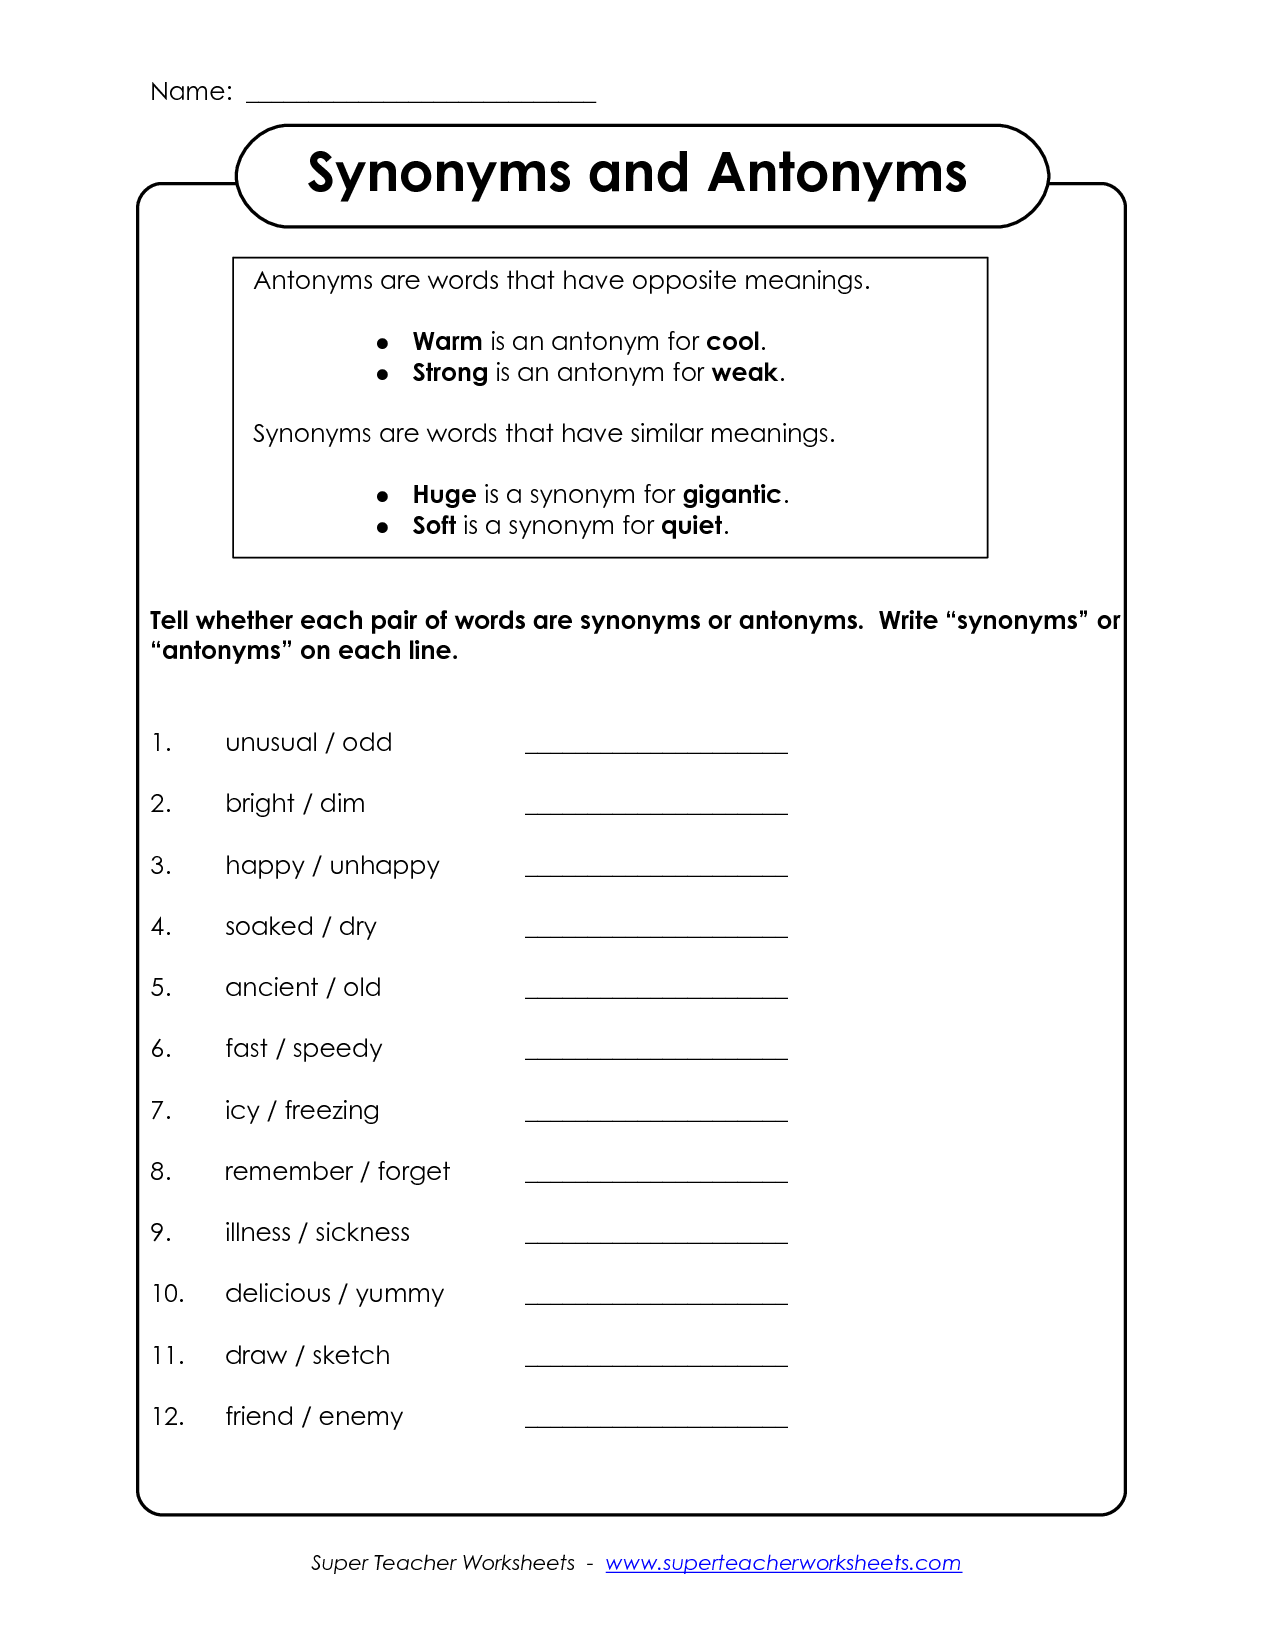 14-best-images-of-printable-synonyms-worksheets-grade-3-synonyms-and-antonyms-worksheets